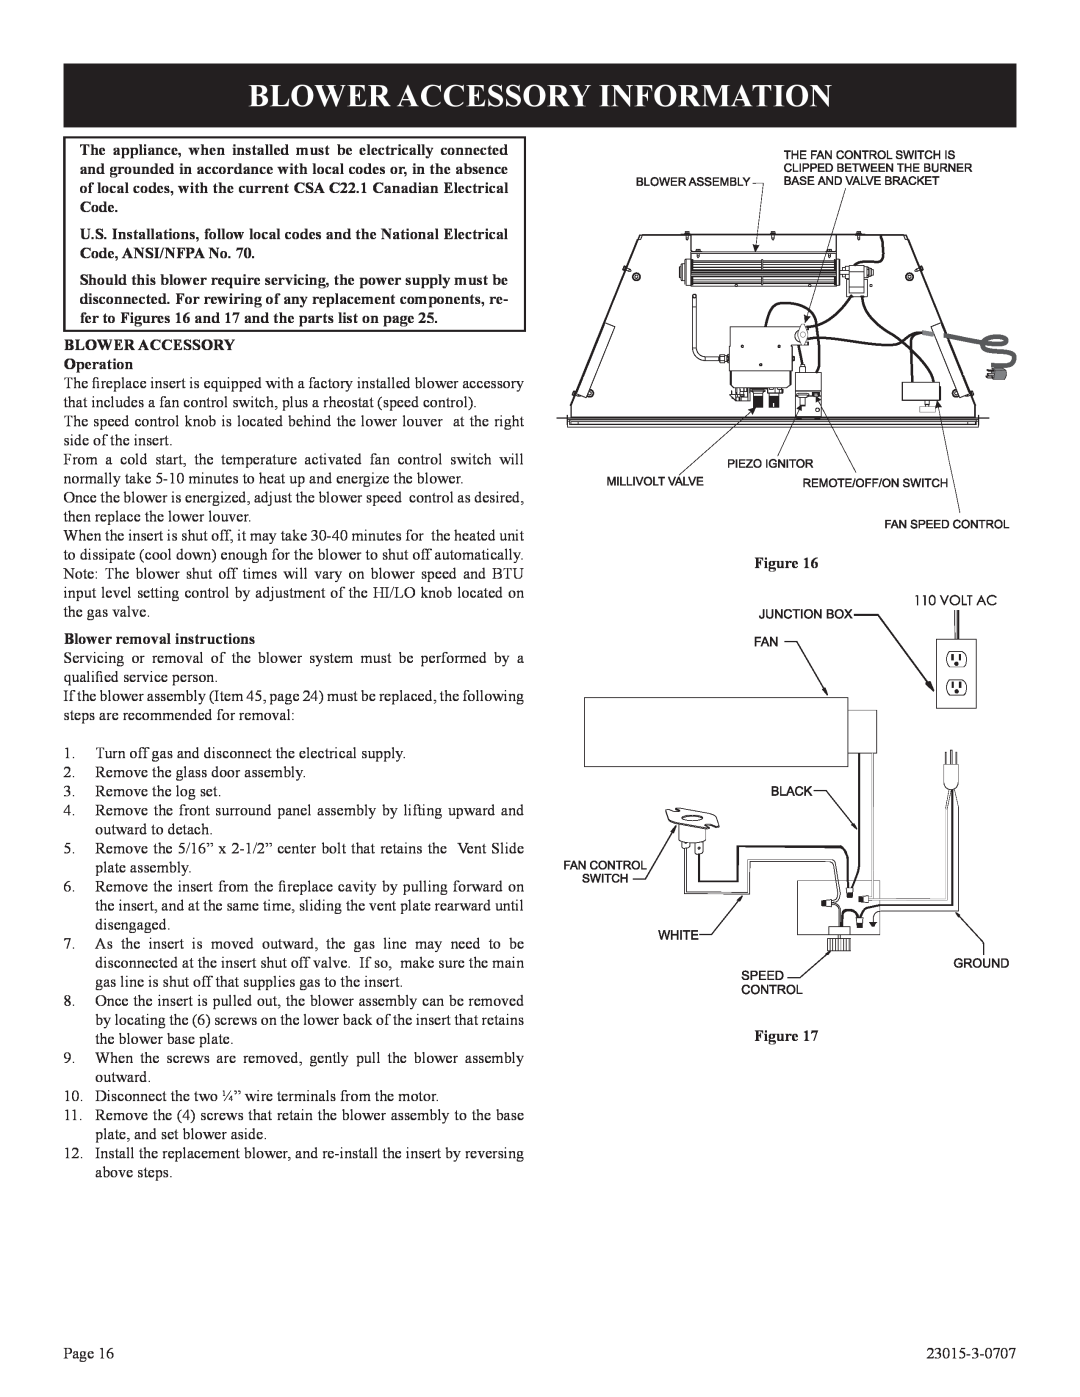 Empire Comfort Systems DV33IN33L Blower Accessory Information, BLOWER ACCESSORY Operation, Blower removal instructions 